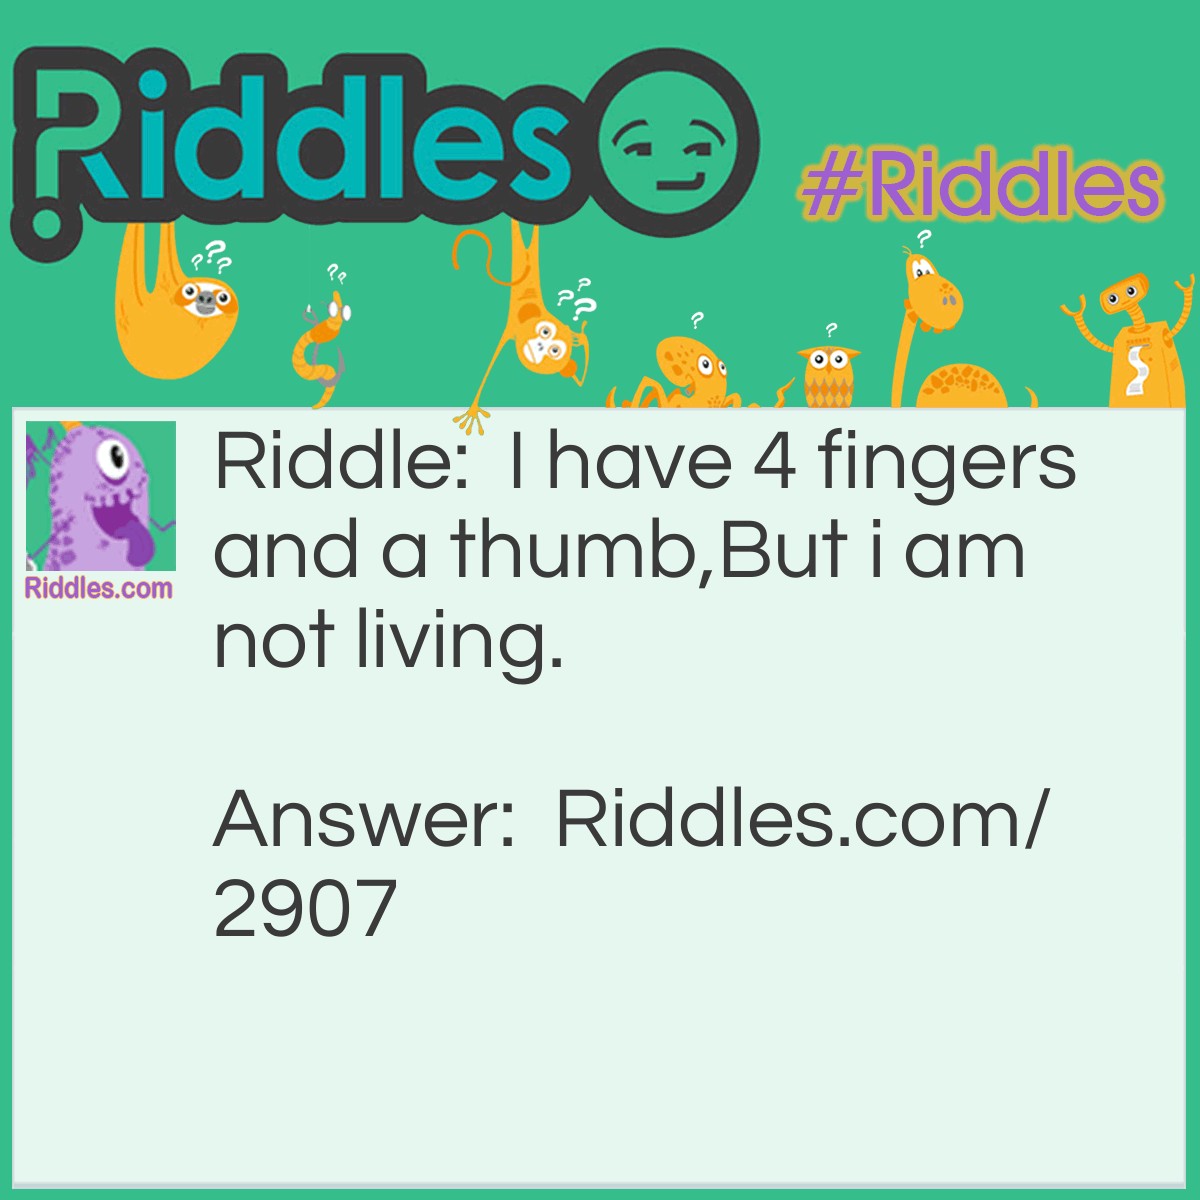 Riddle: I have 4 fingers and a thumb, but i am not living. What am I? Answer: A glove.